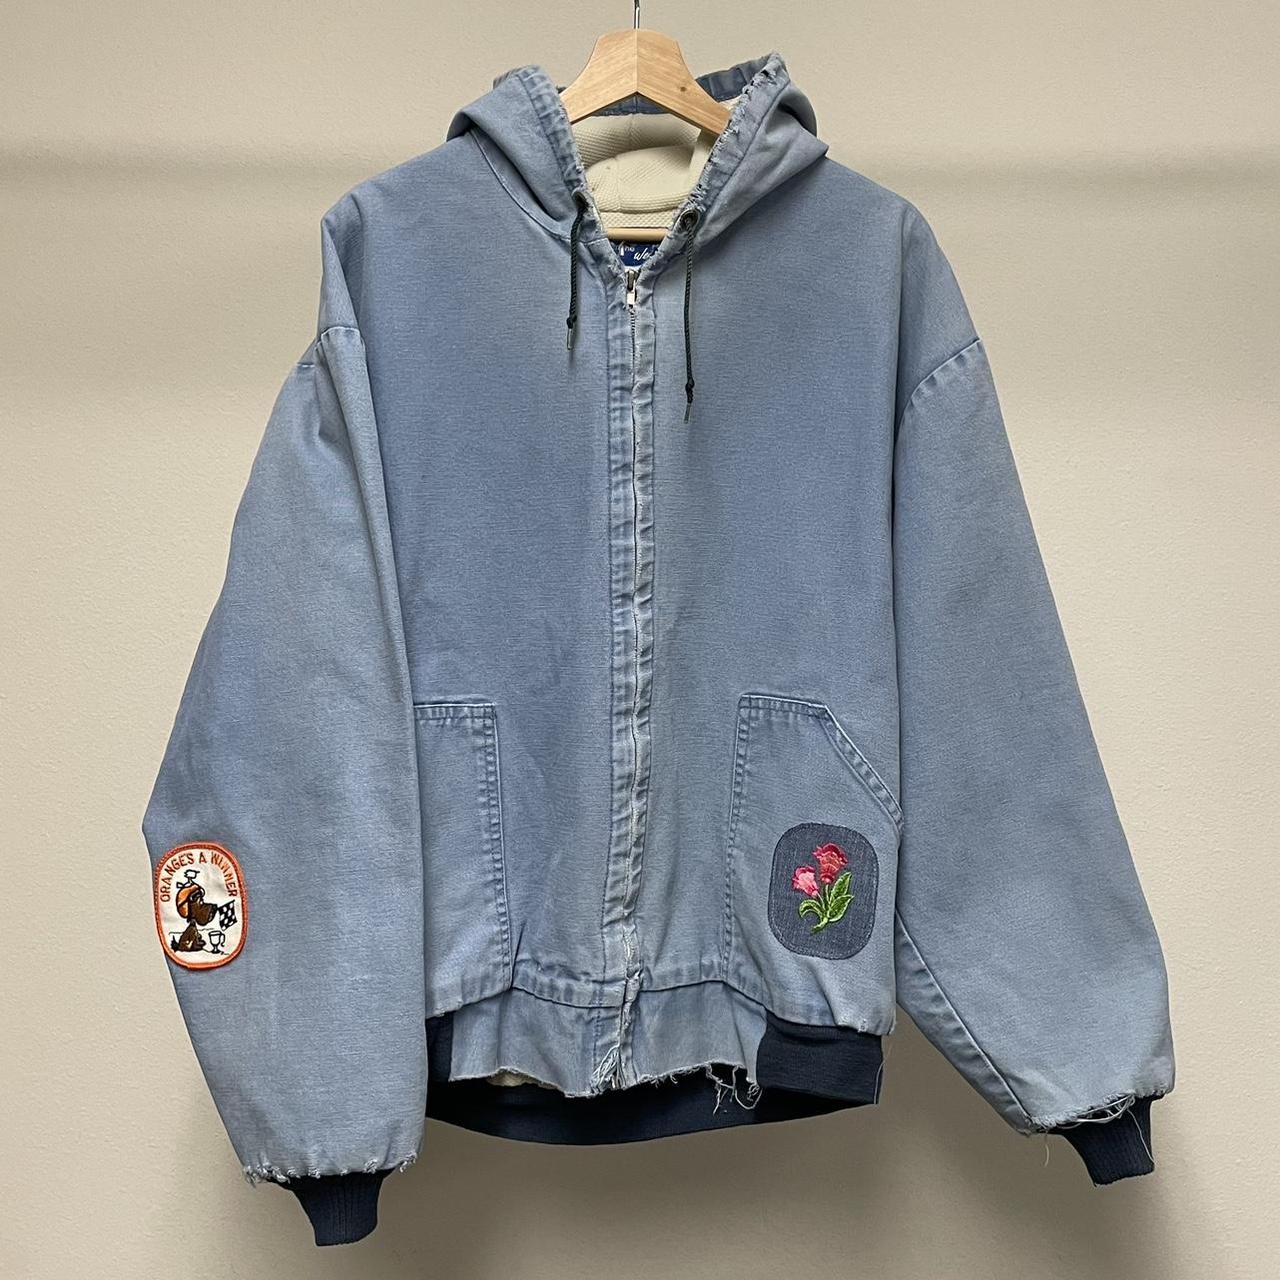 Vintage workwear coat with patches 1990s baby blue... - Depop